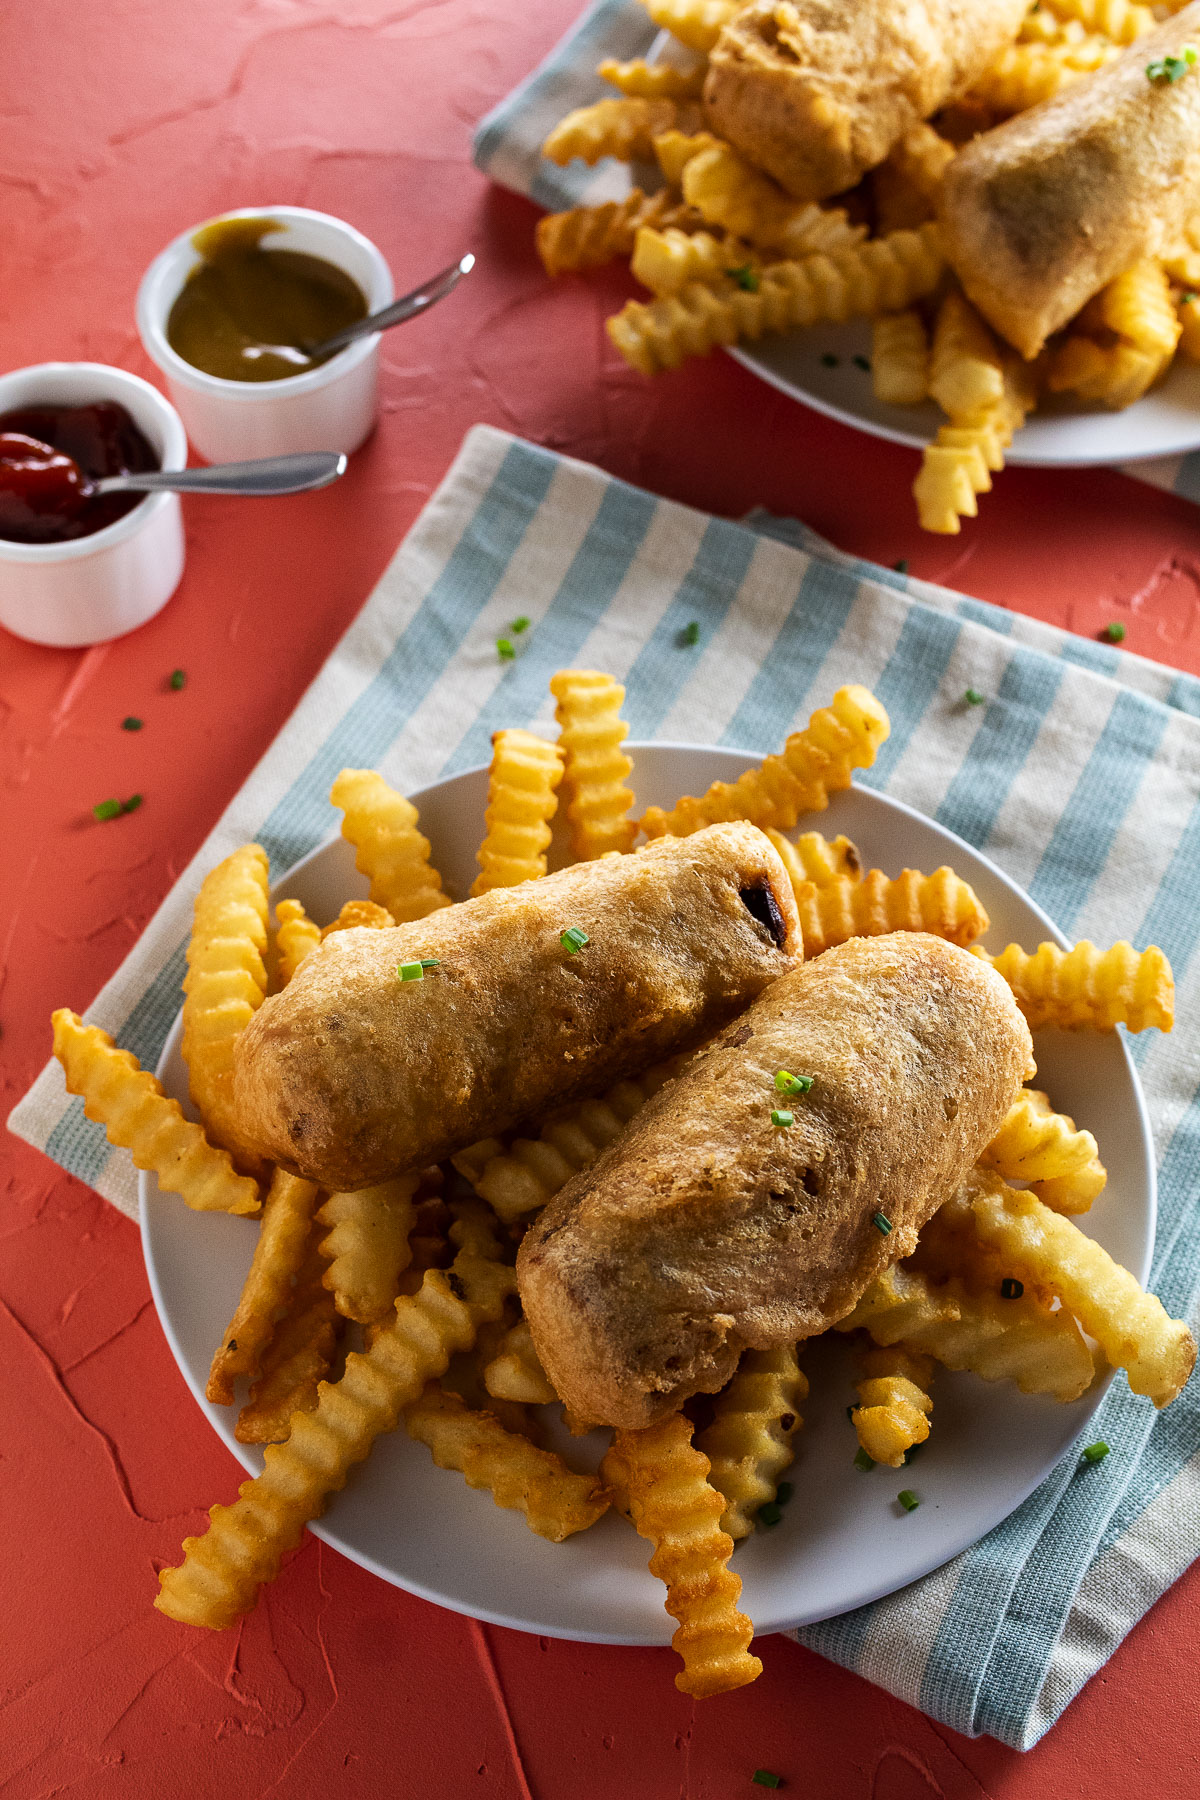 This is an image of battered sausage on a plate.